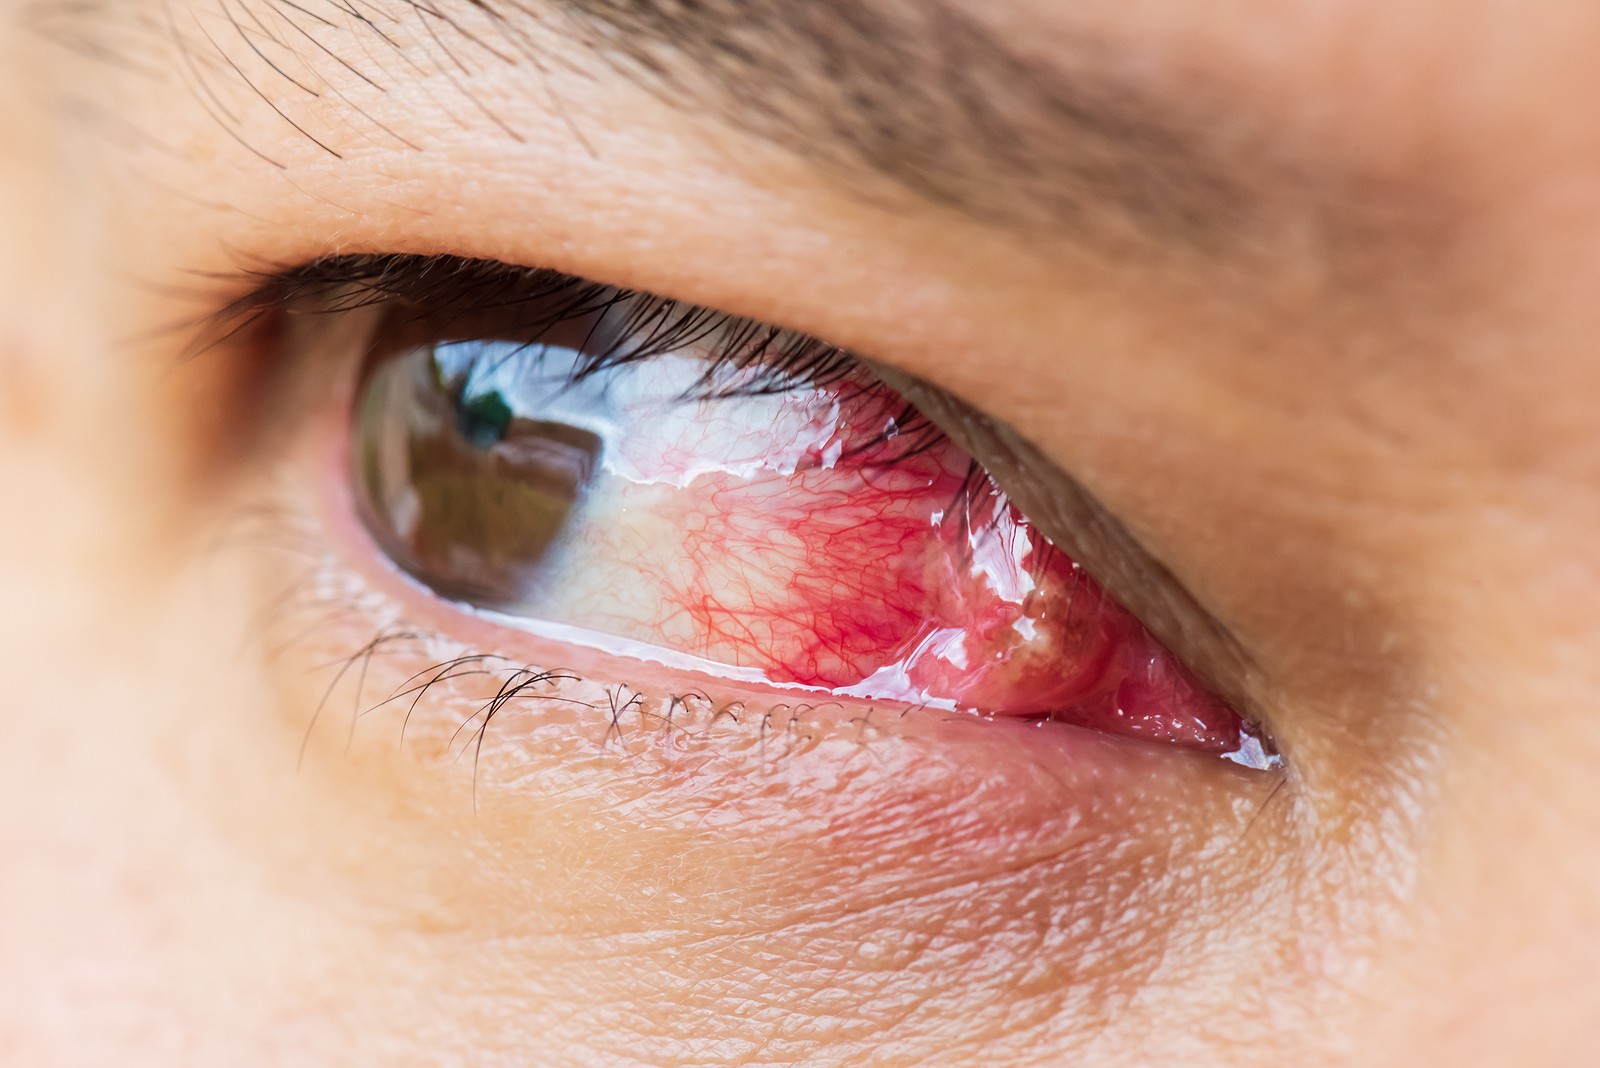 pterygium-eye-condition-and-removal